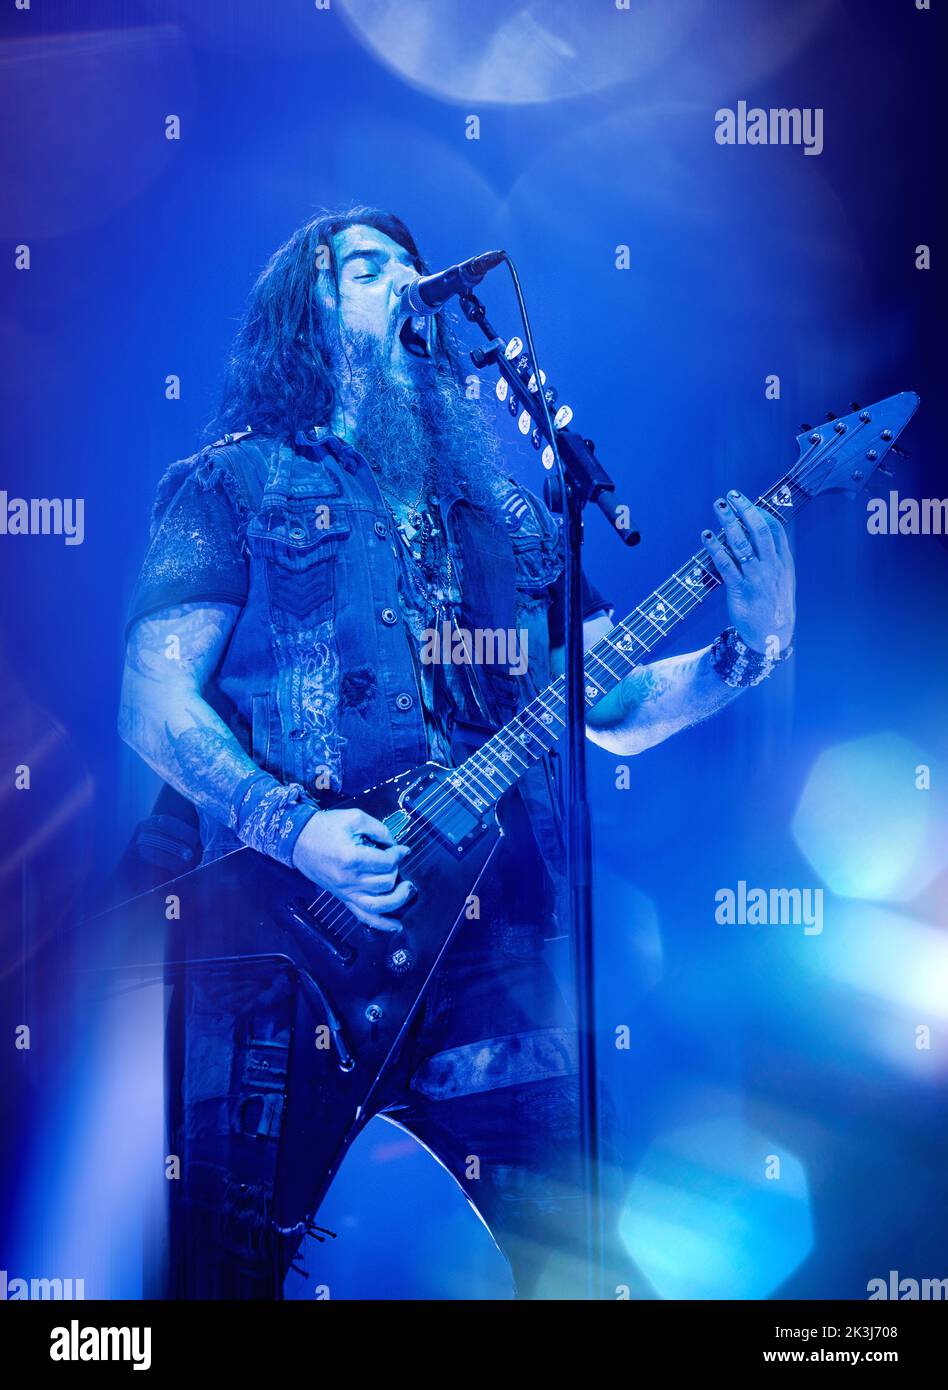 Copenhagen, Denmark. 26th Sep, 2022. The American heavy metal band Machine Head performs a live concert at Forum Black Box in Frederiksberg, Copenhagen. Here vocalist and guitarist Robb Flynn is seen live on stage. (Photo Credit: Gonzales Photo/Alamy Live News Stock Photo